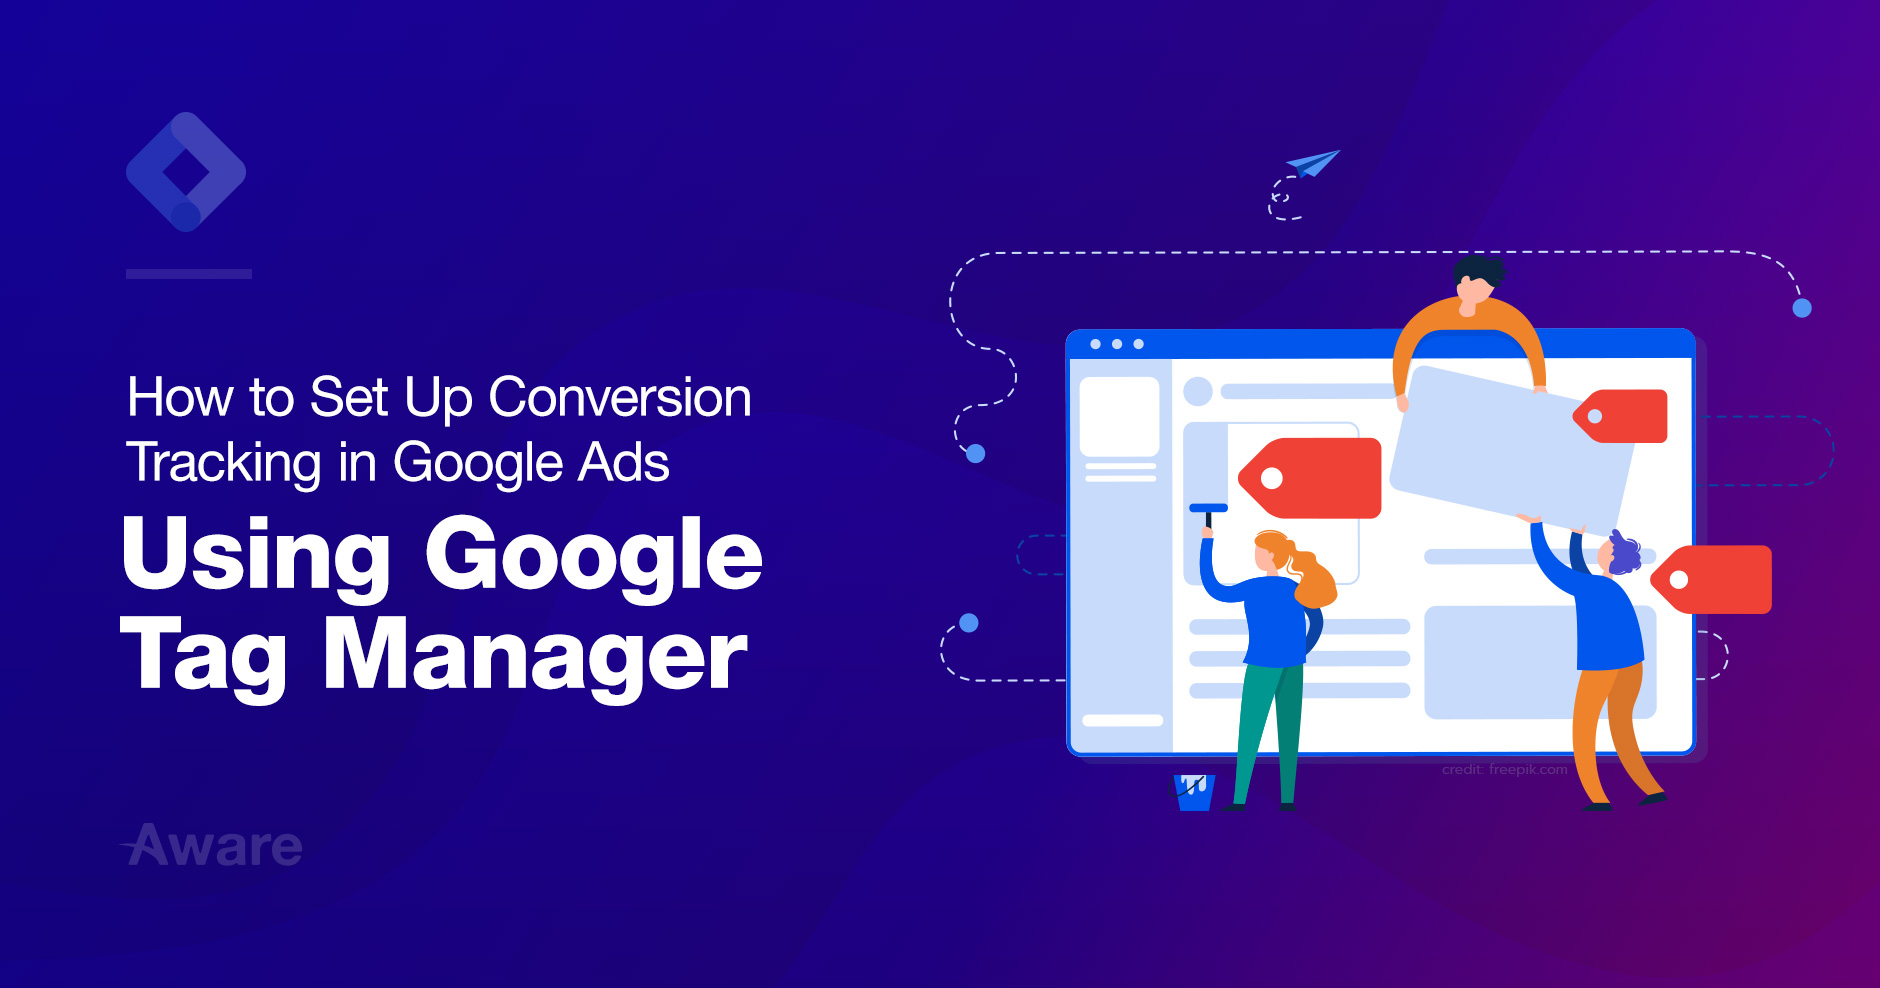 How to Set Up Conversion Tracking in Google Ads Using Google Tag Manager